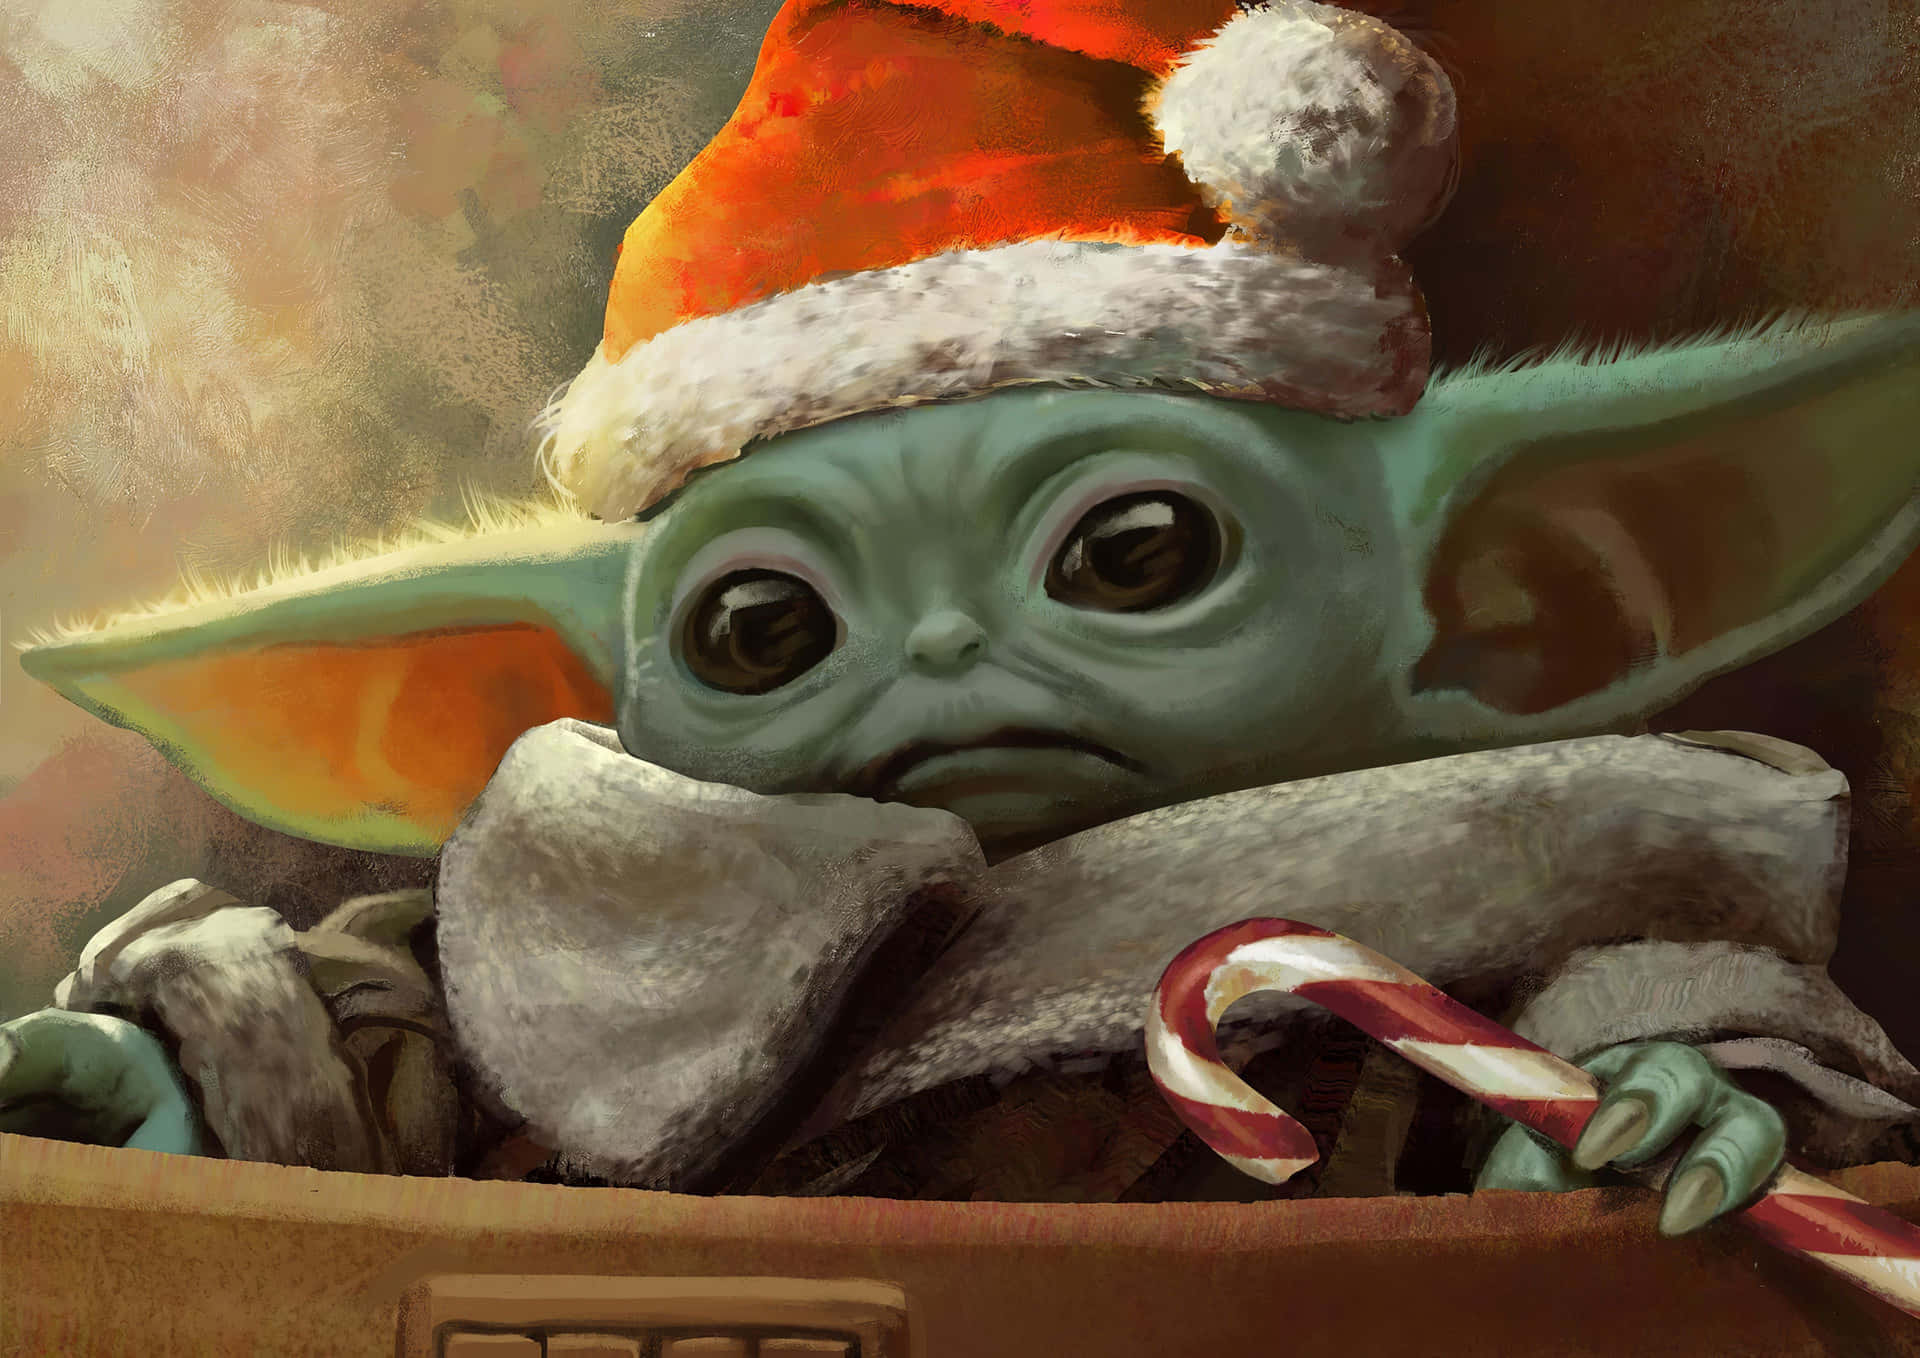 "Welcome to the world of Baby Yoda!"